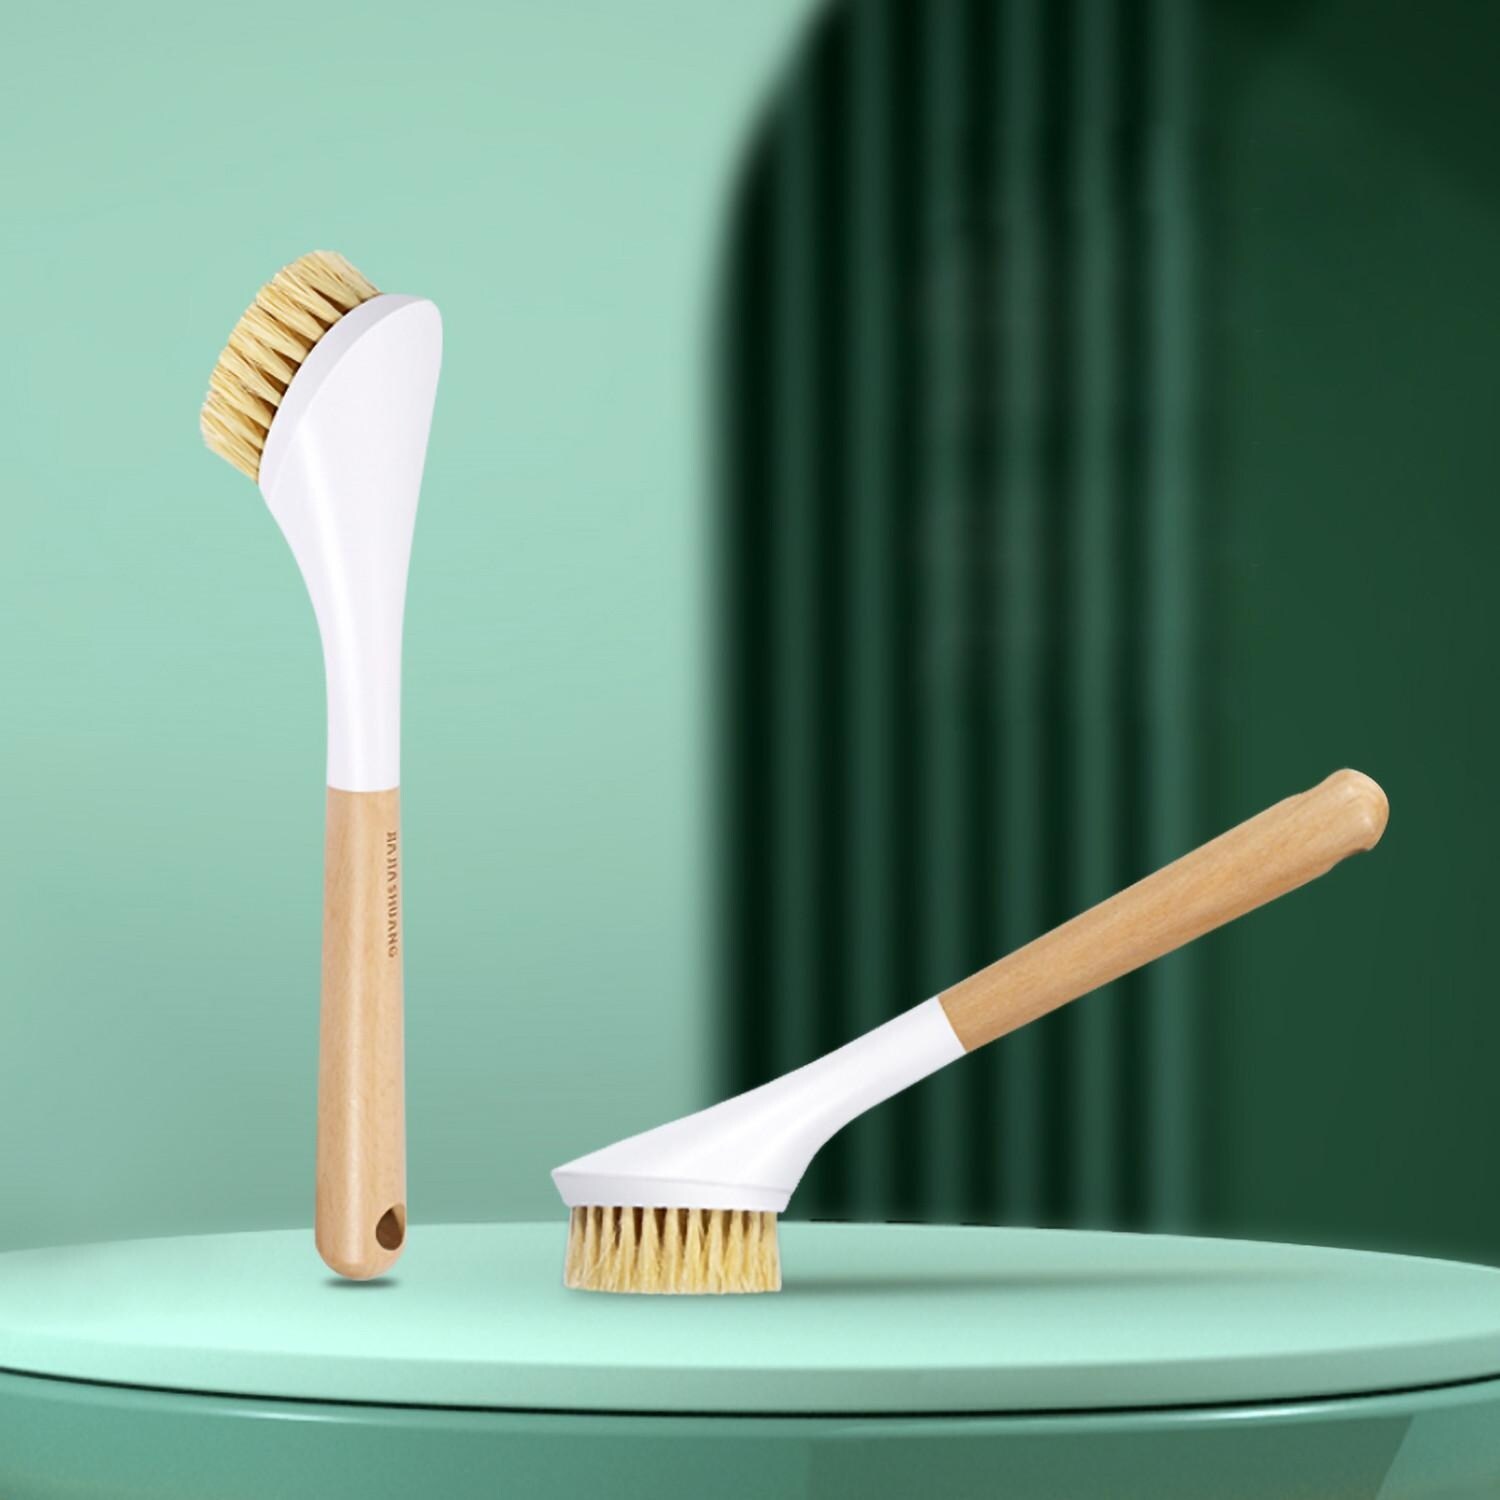 https://ak1.ostkcdn.com/images/products/is/images/direct/f54b37e424ac63a5393031e4821c580666c39335/Kitchen-Dish-Brush-Beech-Handle-Cleaning-Brush-For-Pans-Pots-Sink-Cleaning.jpg